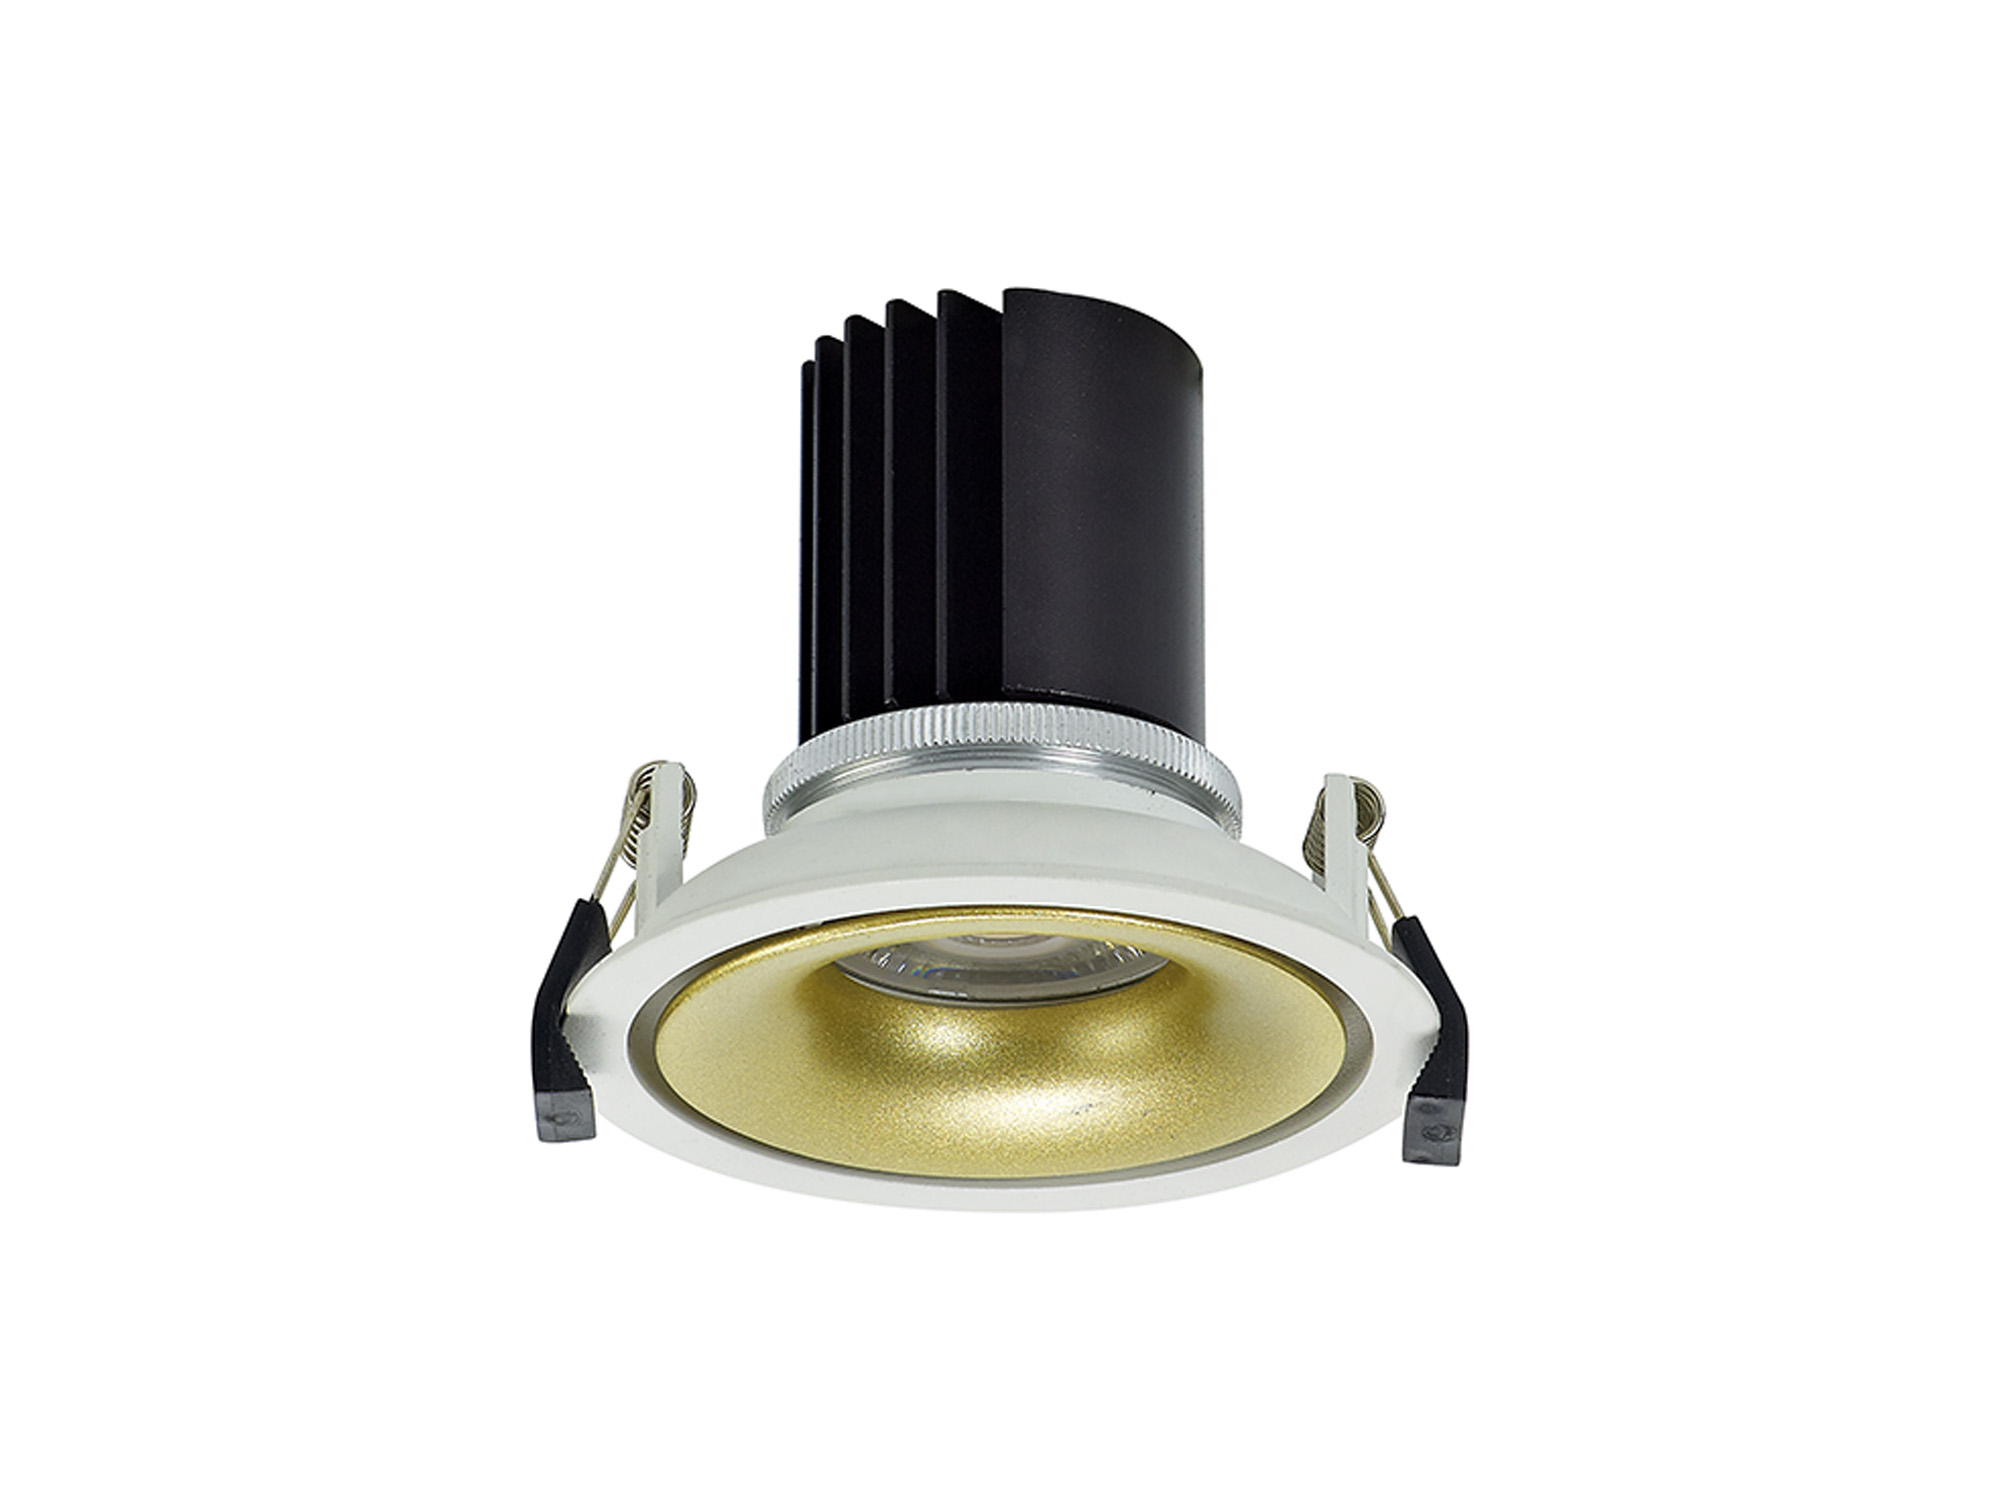 DM202108  Bolor 12 Tridonic Powered 12W 2700K 1200lm 12° CRI>90 LED Engine White/Gold Fixed Recessed Spotlight; IP20